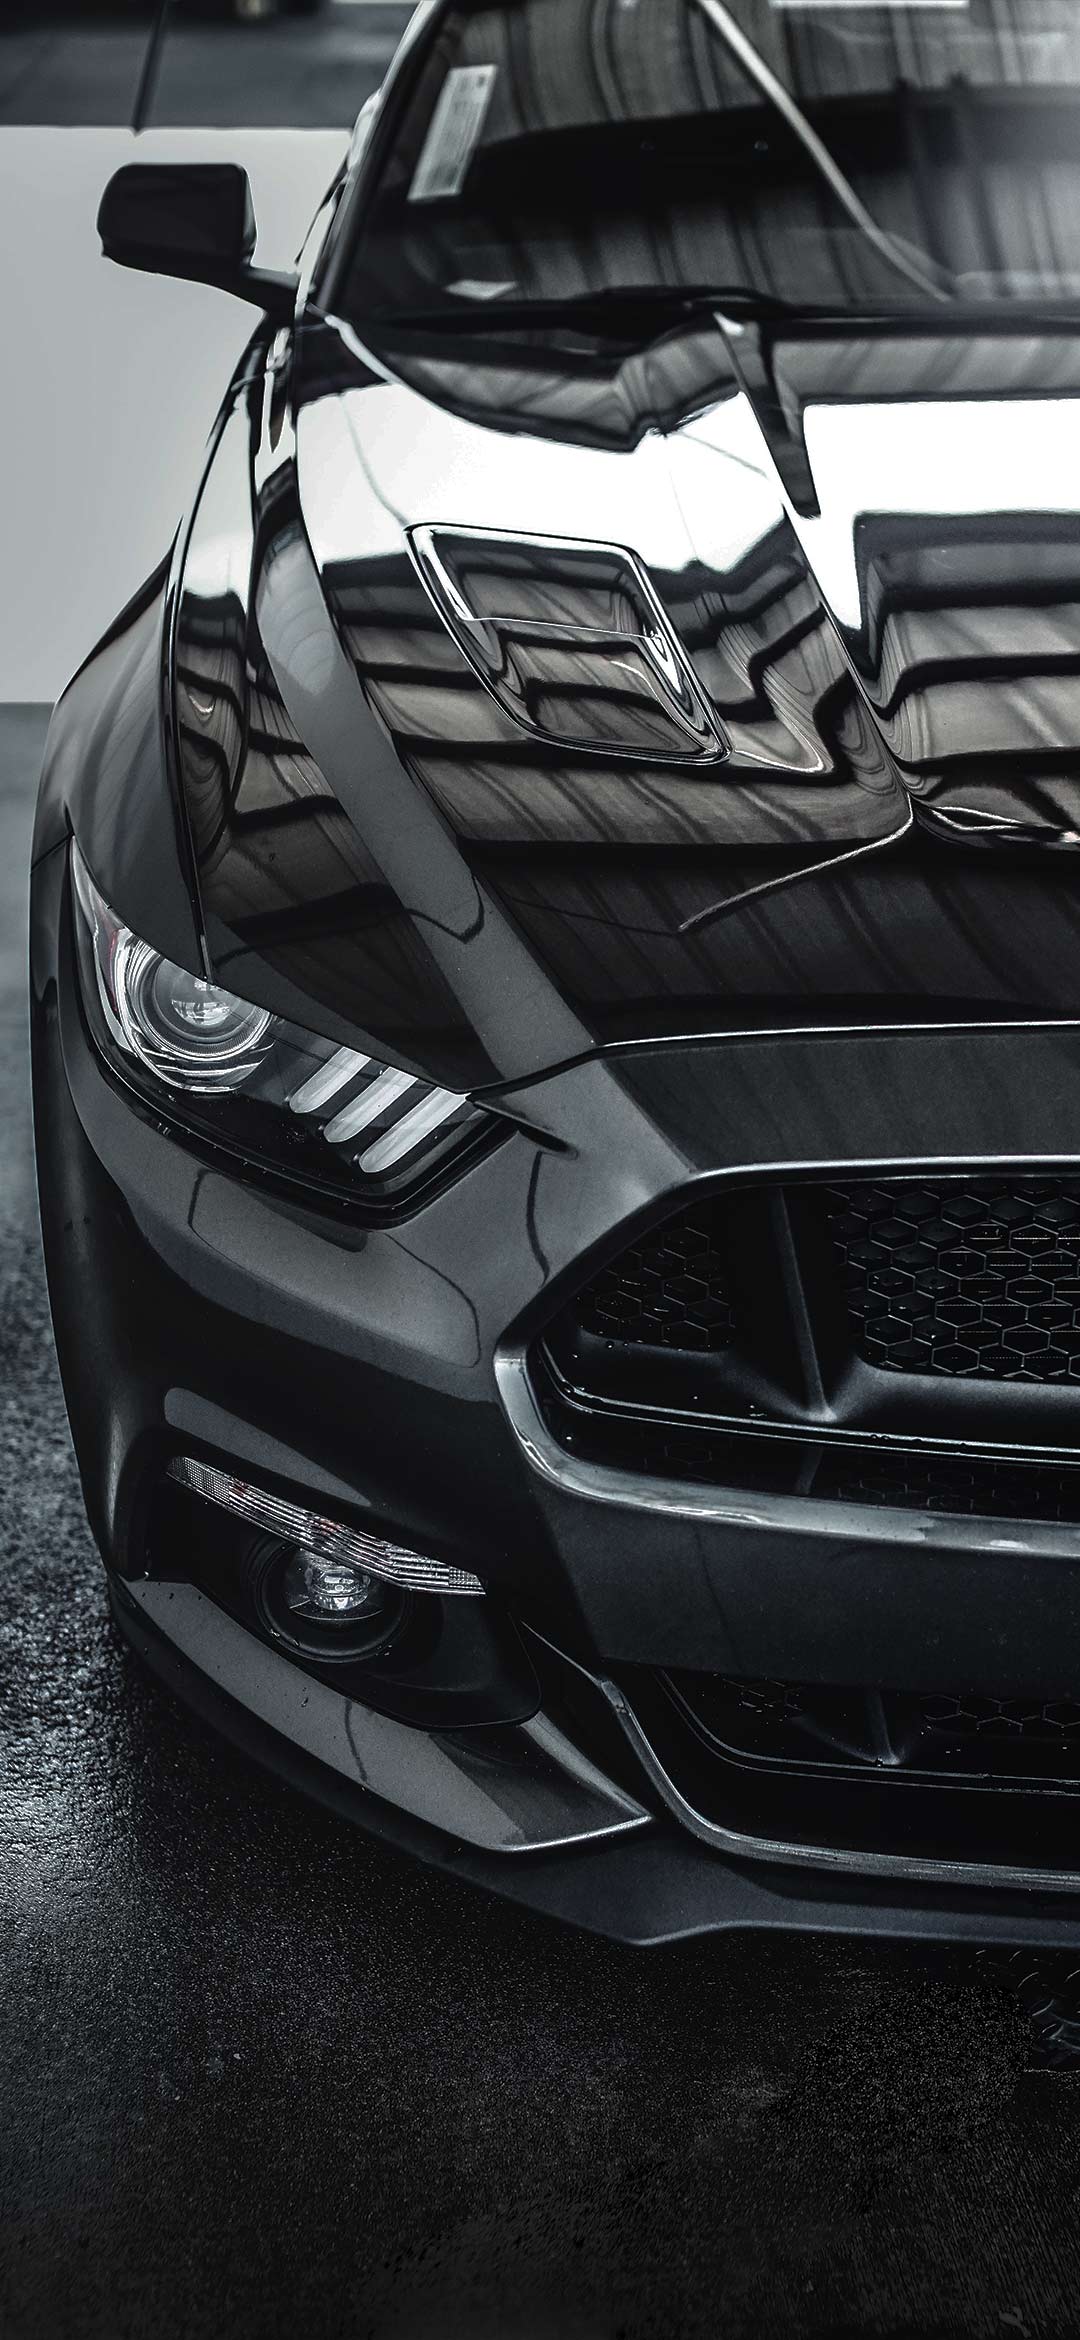 Cars Wallpapers - Page 4 of 28 - iPhone Wallpapers : iPhone Wallpapers |  Ford mustang wallpaper, Mustang iphone wallpaper, Mustang wallpaper